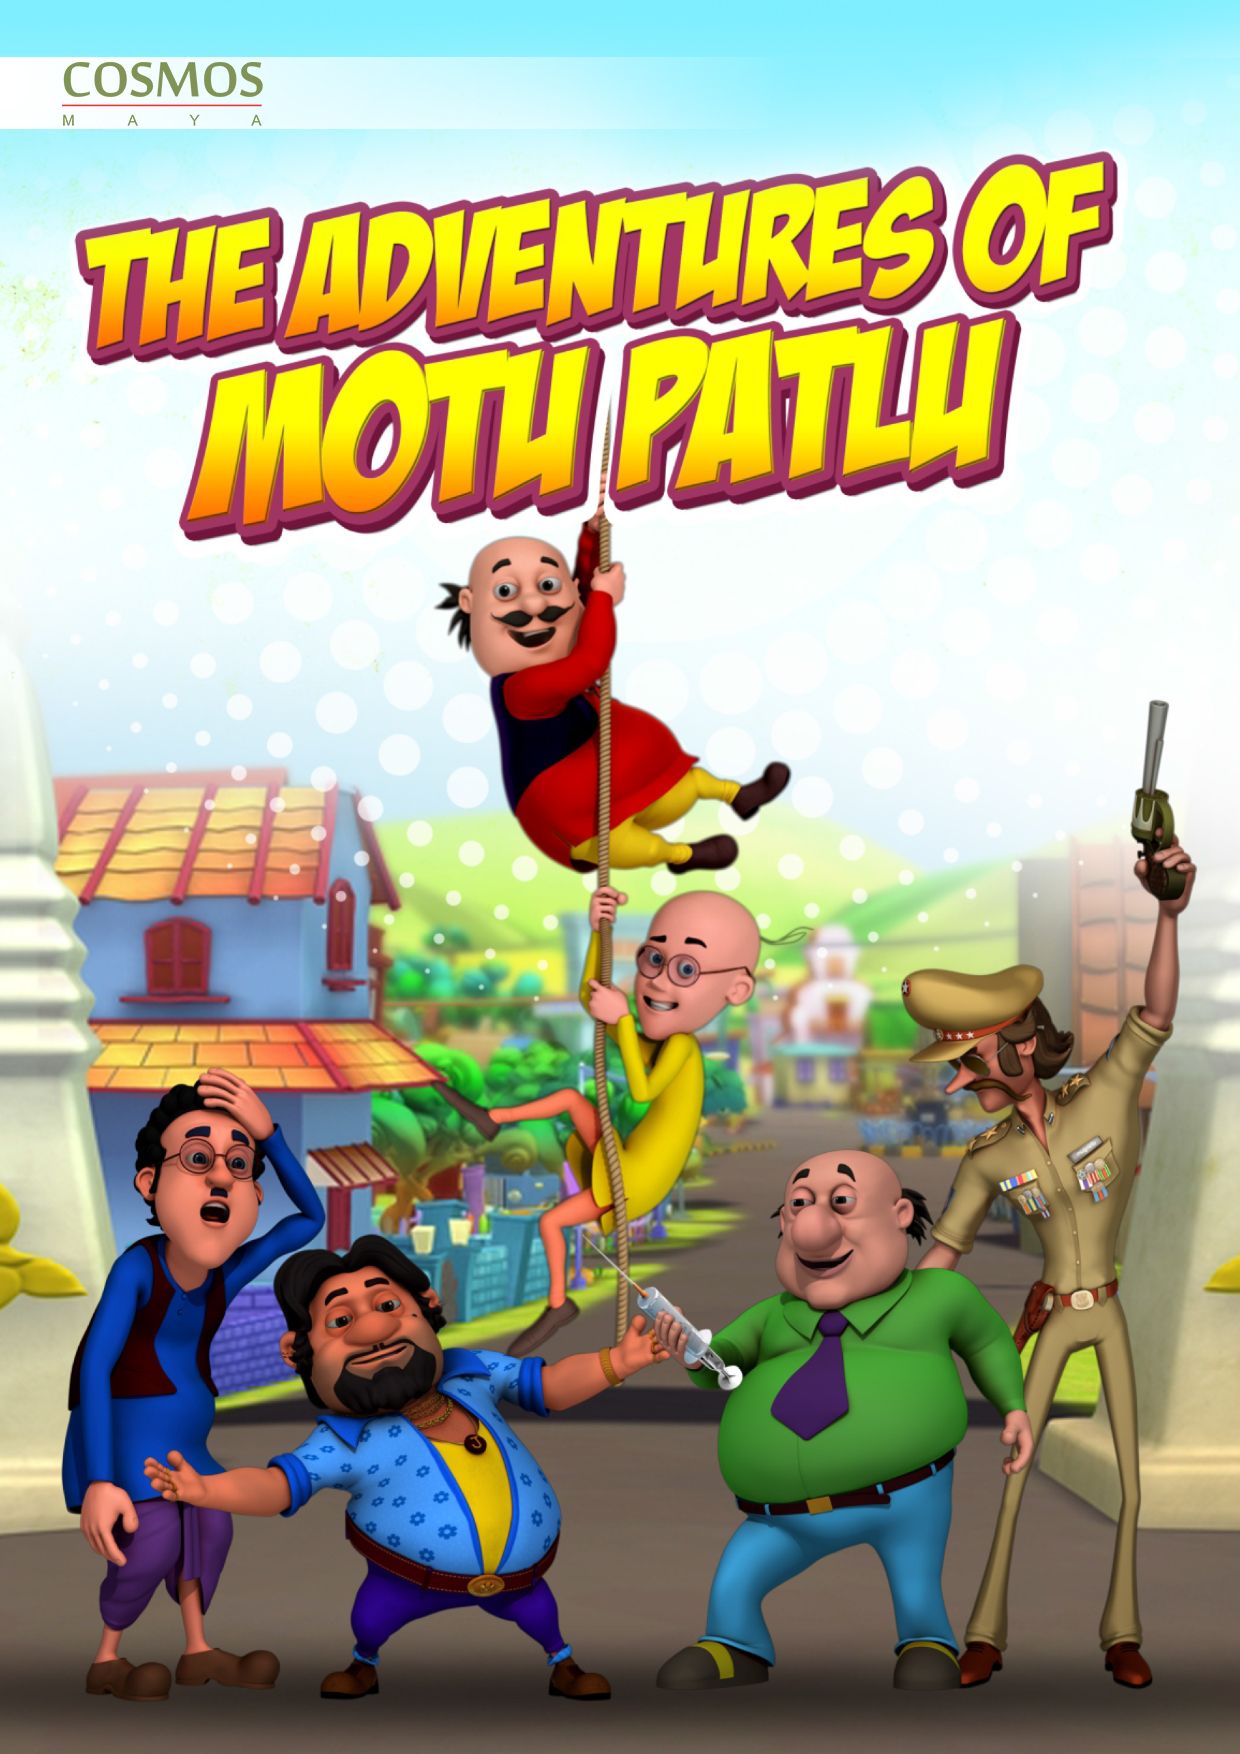 Motu-Patlu told the children - there is a risk of heatstroke if you go out  in the sun during the hot summer | मनोरंजन के साथ जानकारी: मोटू-पतलू ने  बच्चों को बताया-अधिक